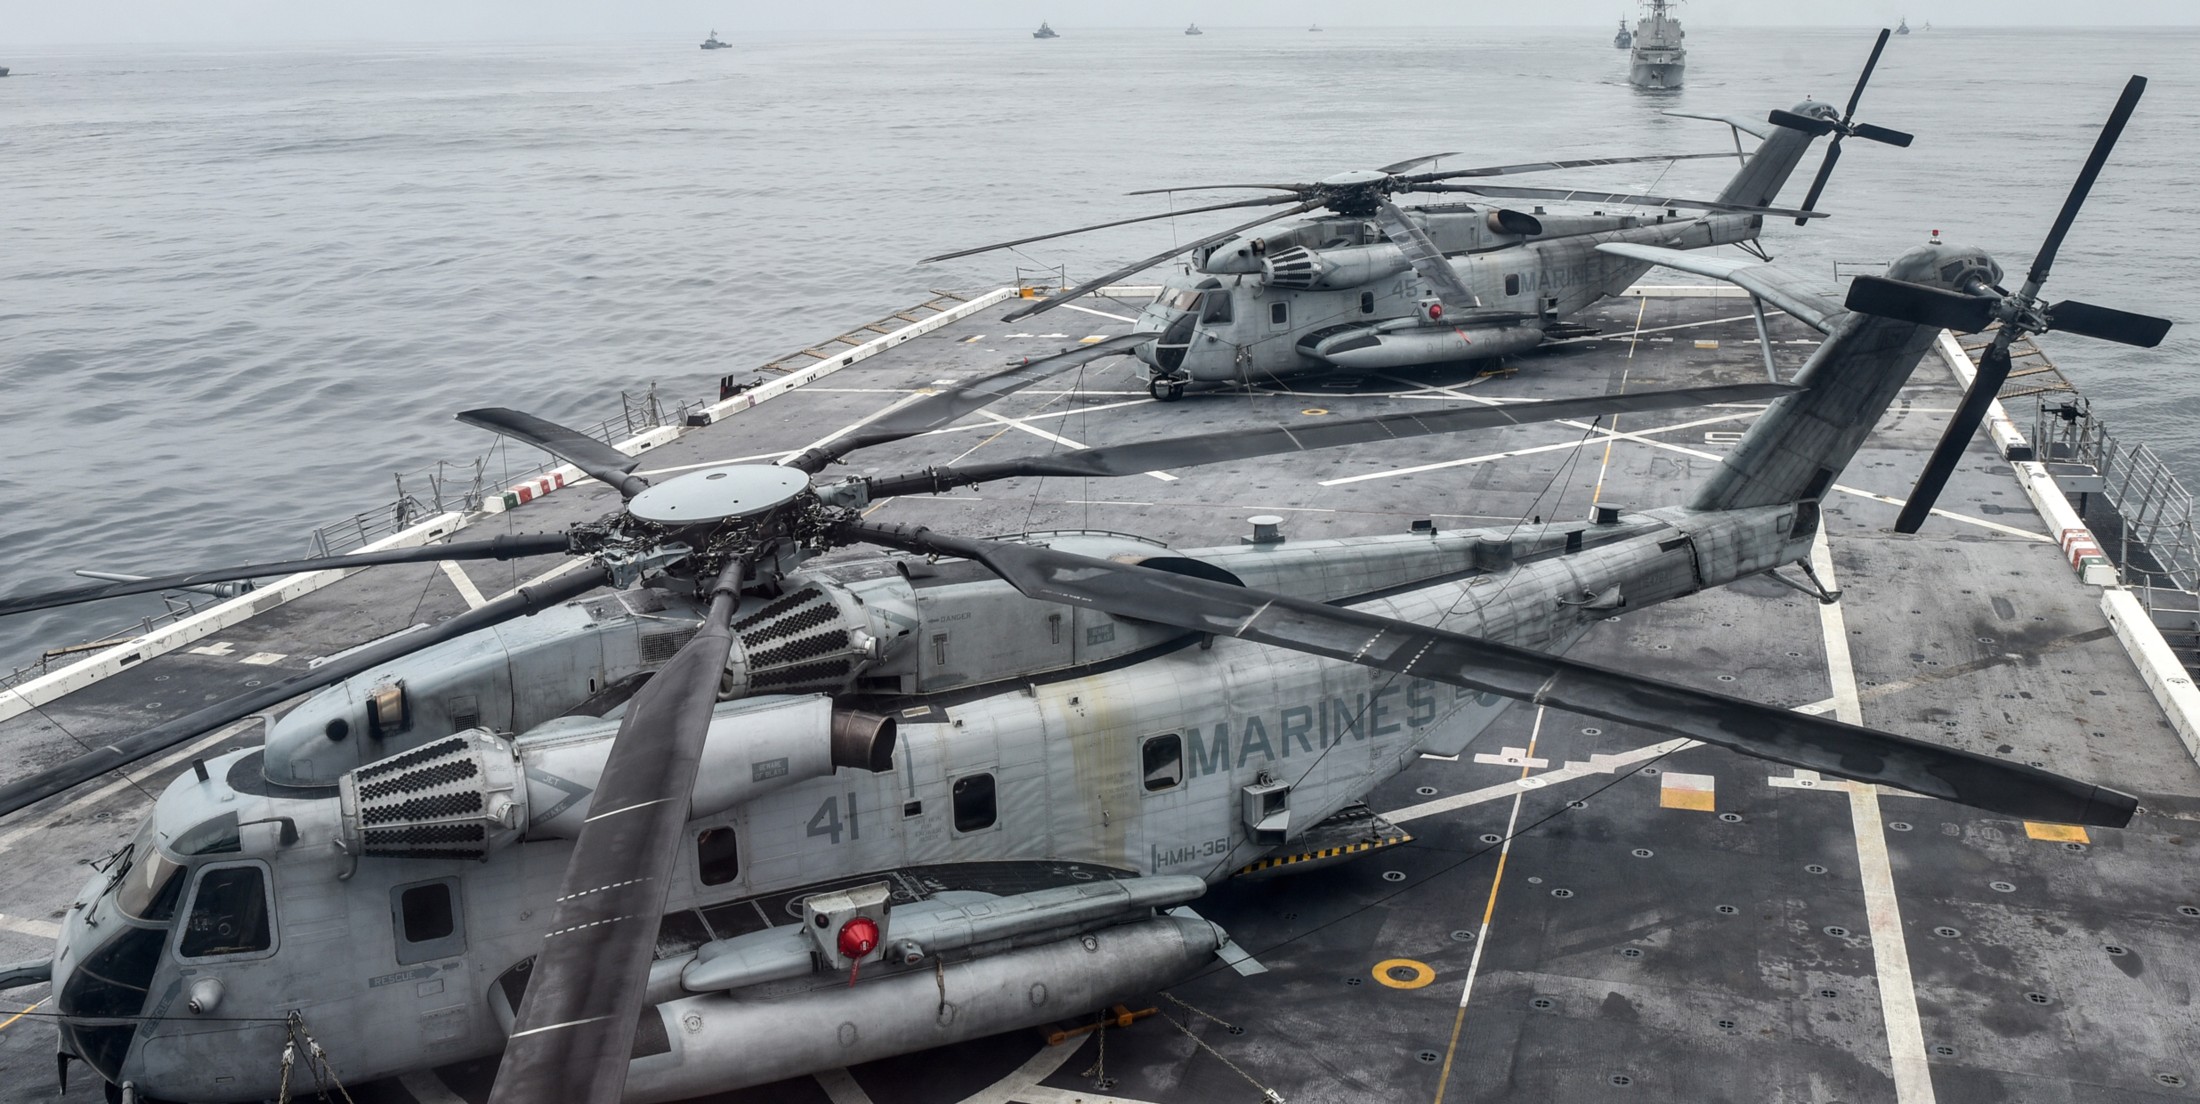 hmh-361 flying tigers marine heavy helicopter squadron usmc sikorsky ch-53e super stallion 25 uss somerset lpd-25